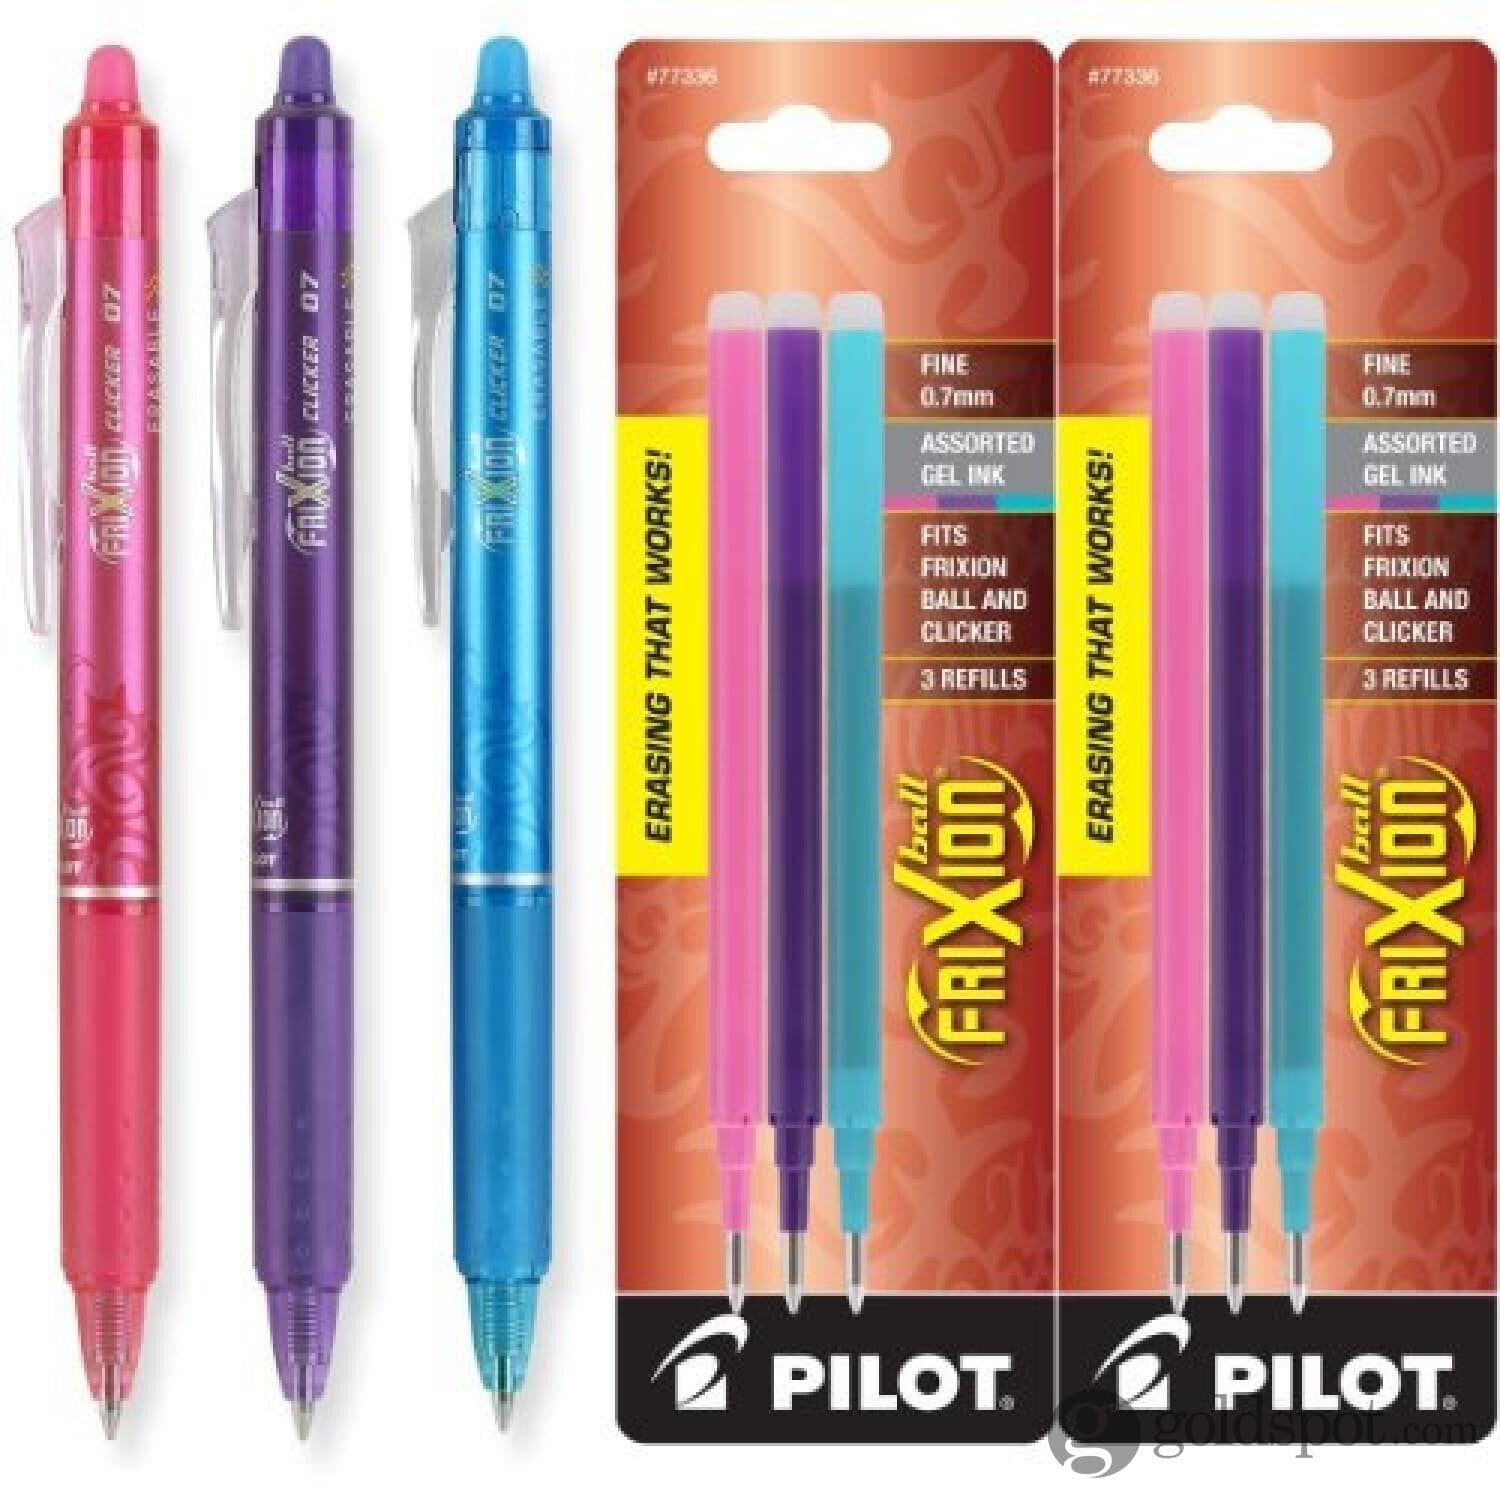 Pilot FriXion Clicker Retractable Erasable Gel Ink Pens, Fine Point, 0.7mm, Assorted Fashion Ink, Pack of 3 with Bonus 2 Packs of Refills